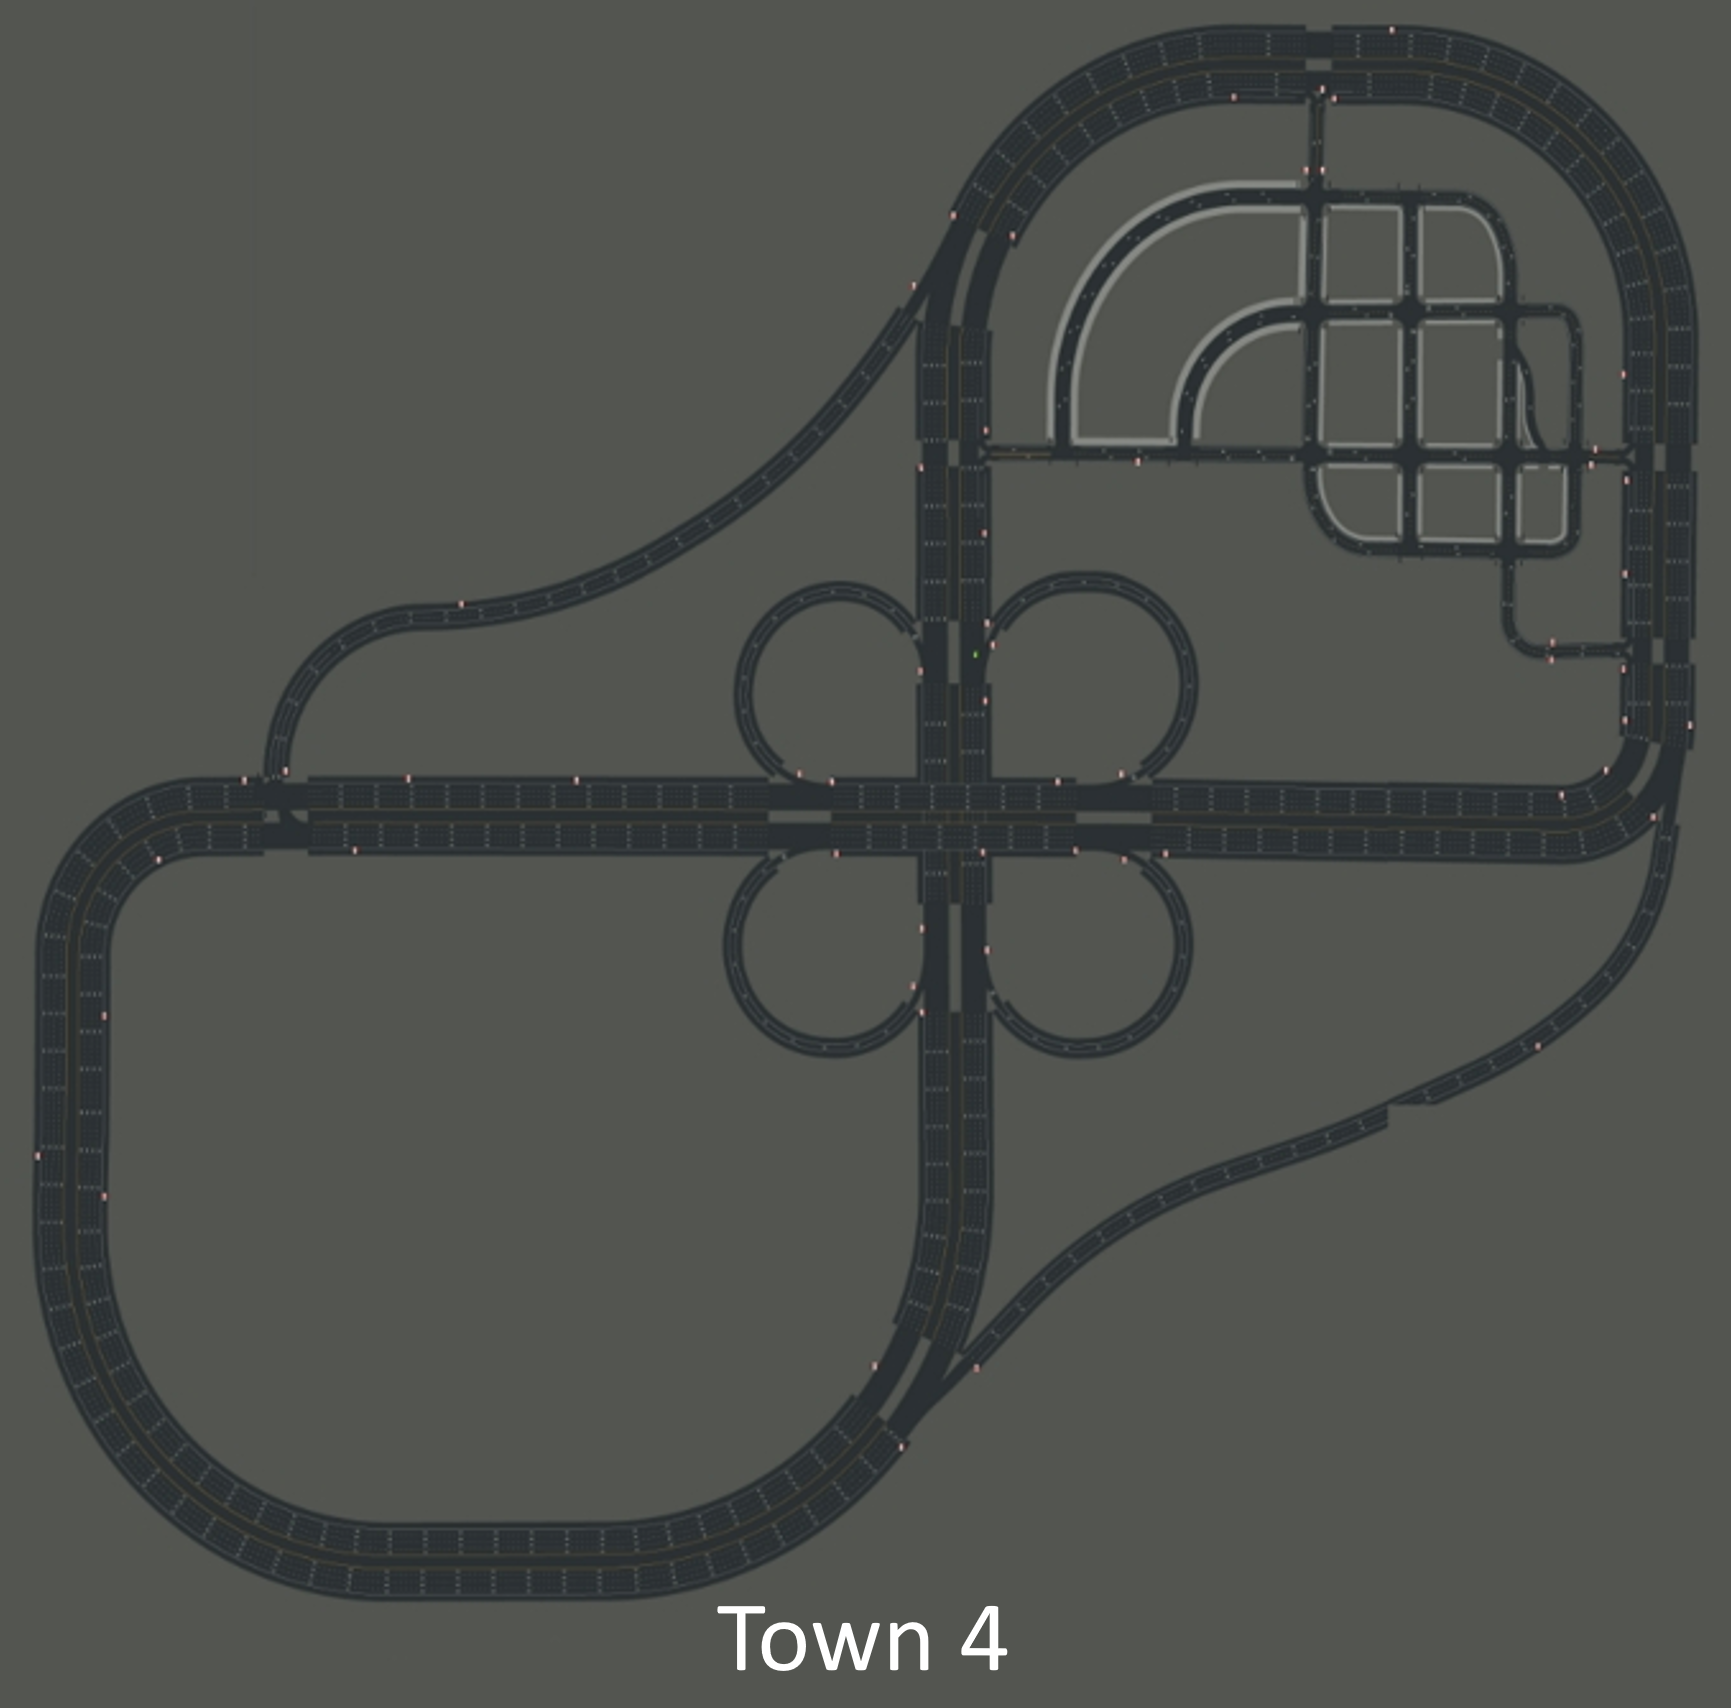 Town 4